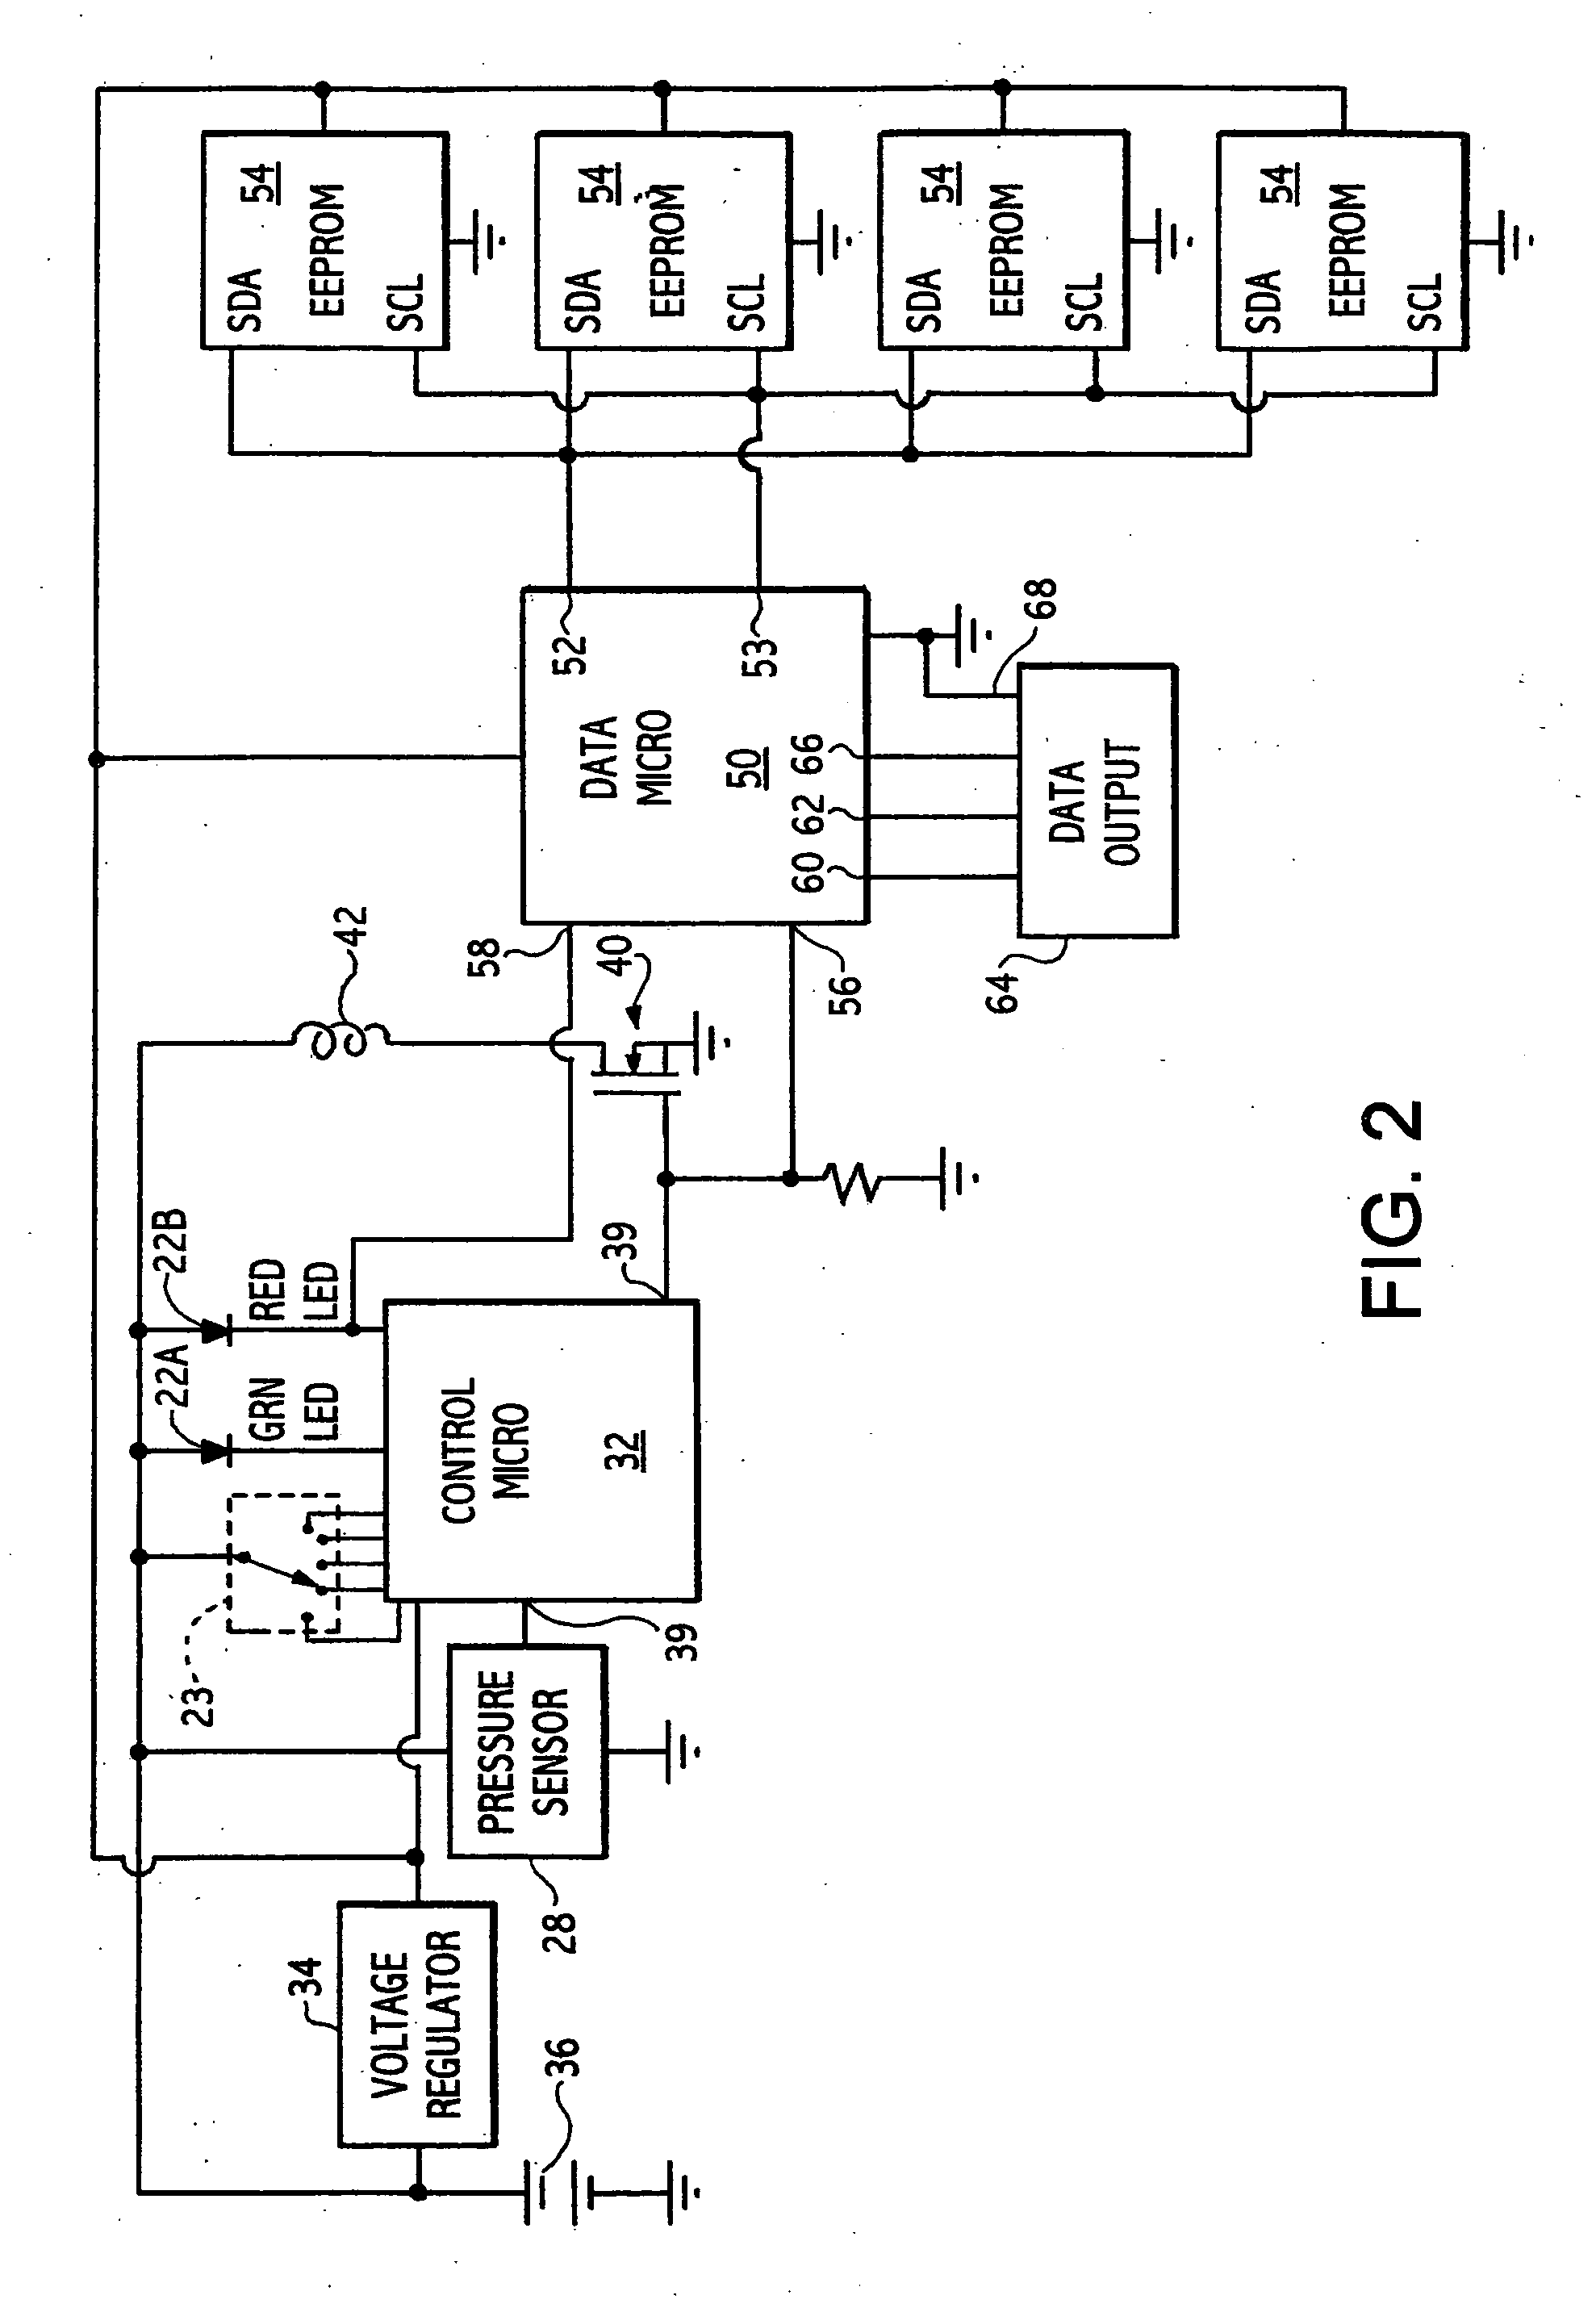 Apparatus and method for monitoring supplemental oxygen usage